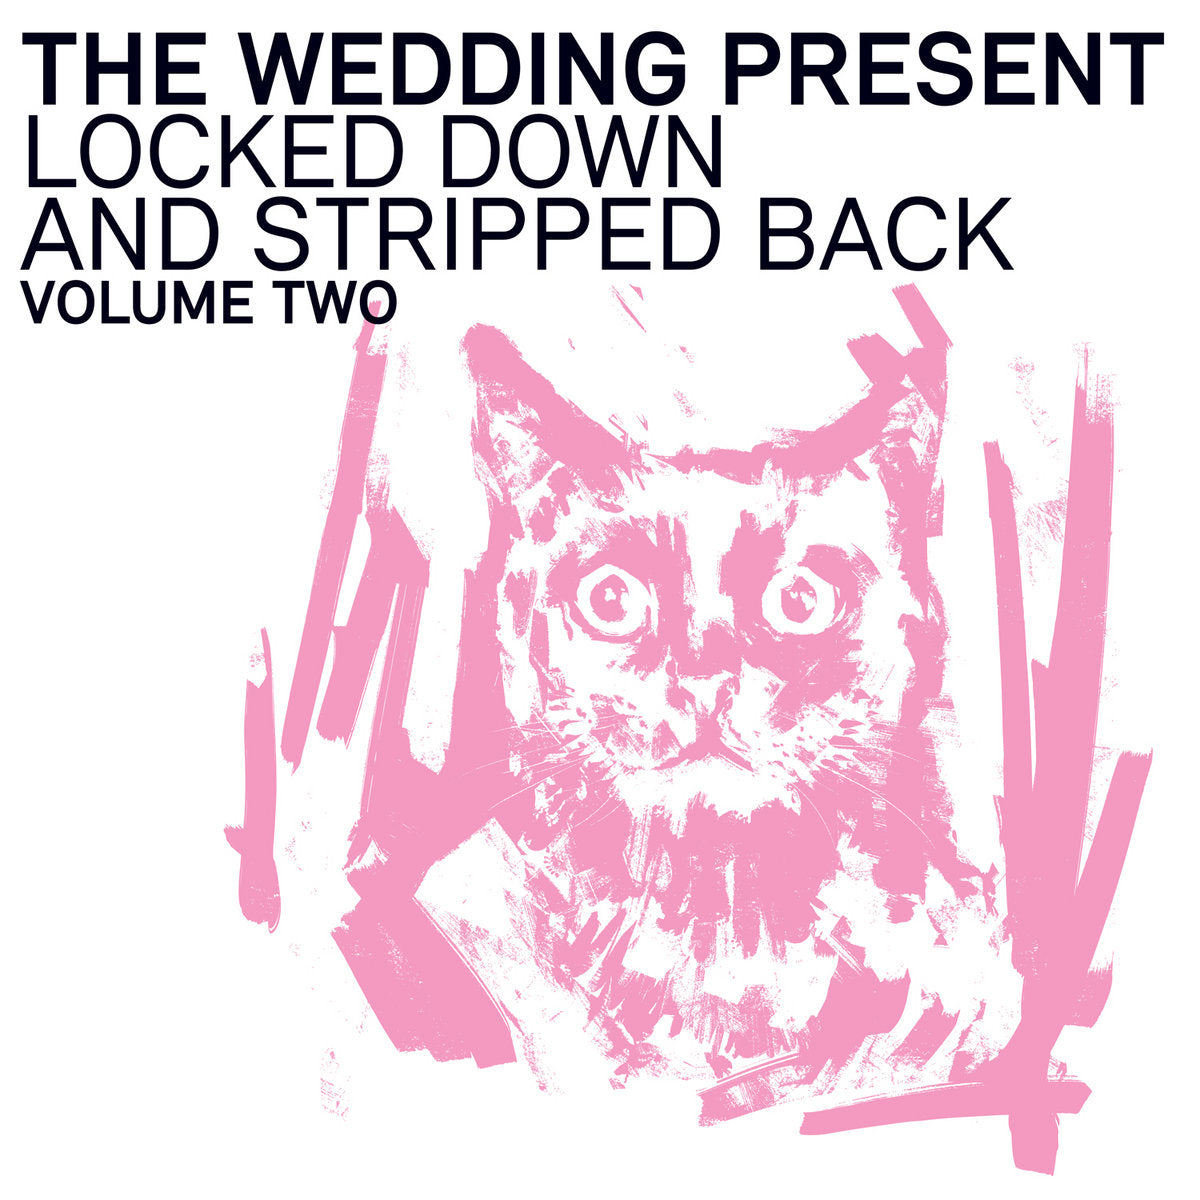 Wedding Present "Locked Down and Stripped Back" Vol. 2 Pink LP (2022)